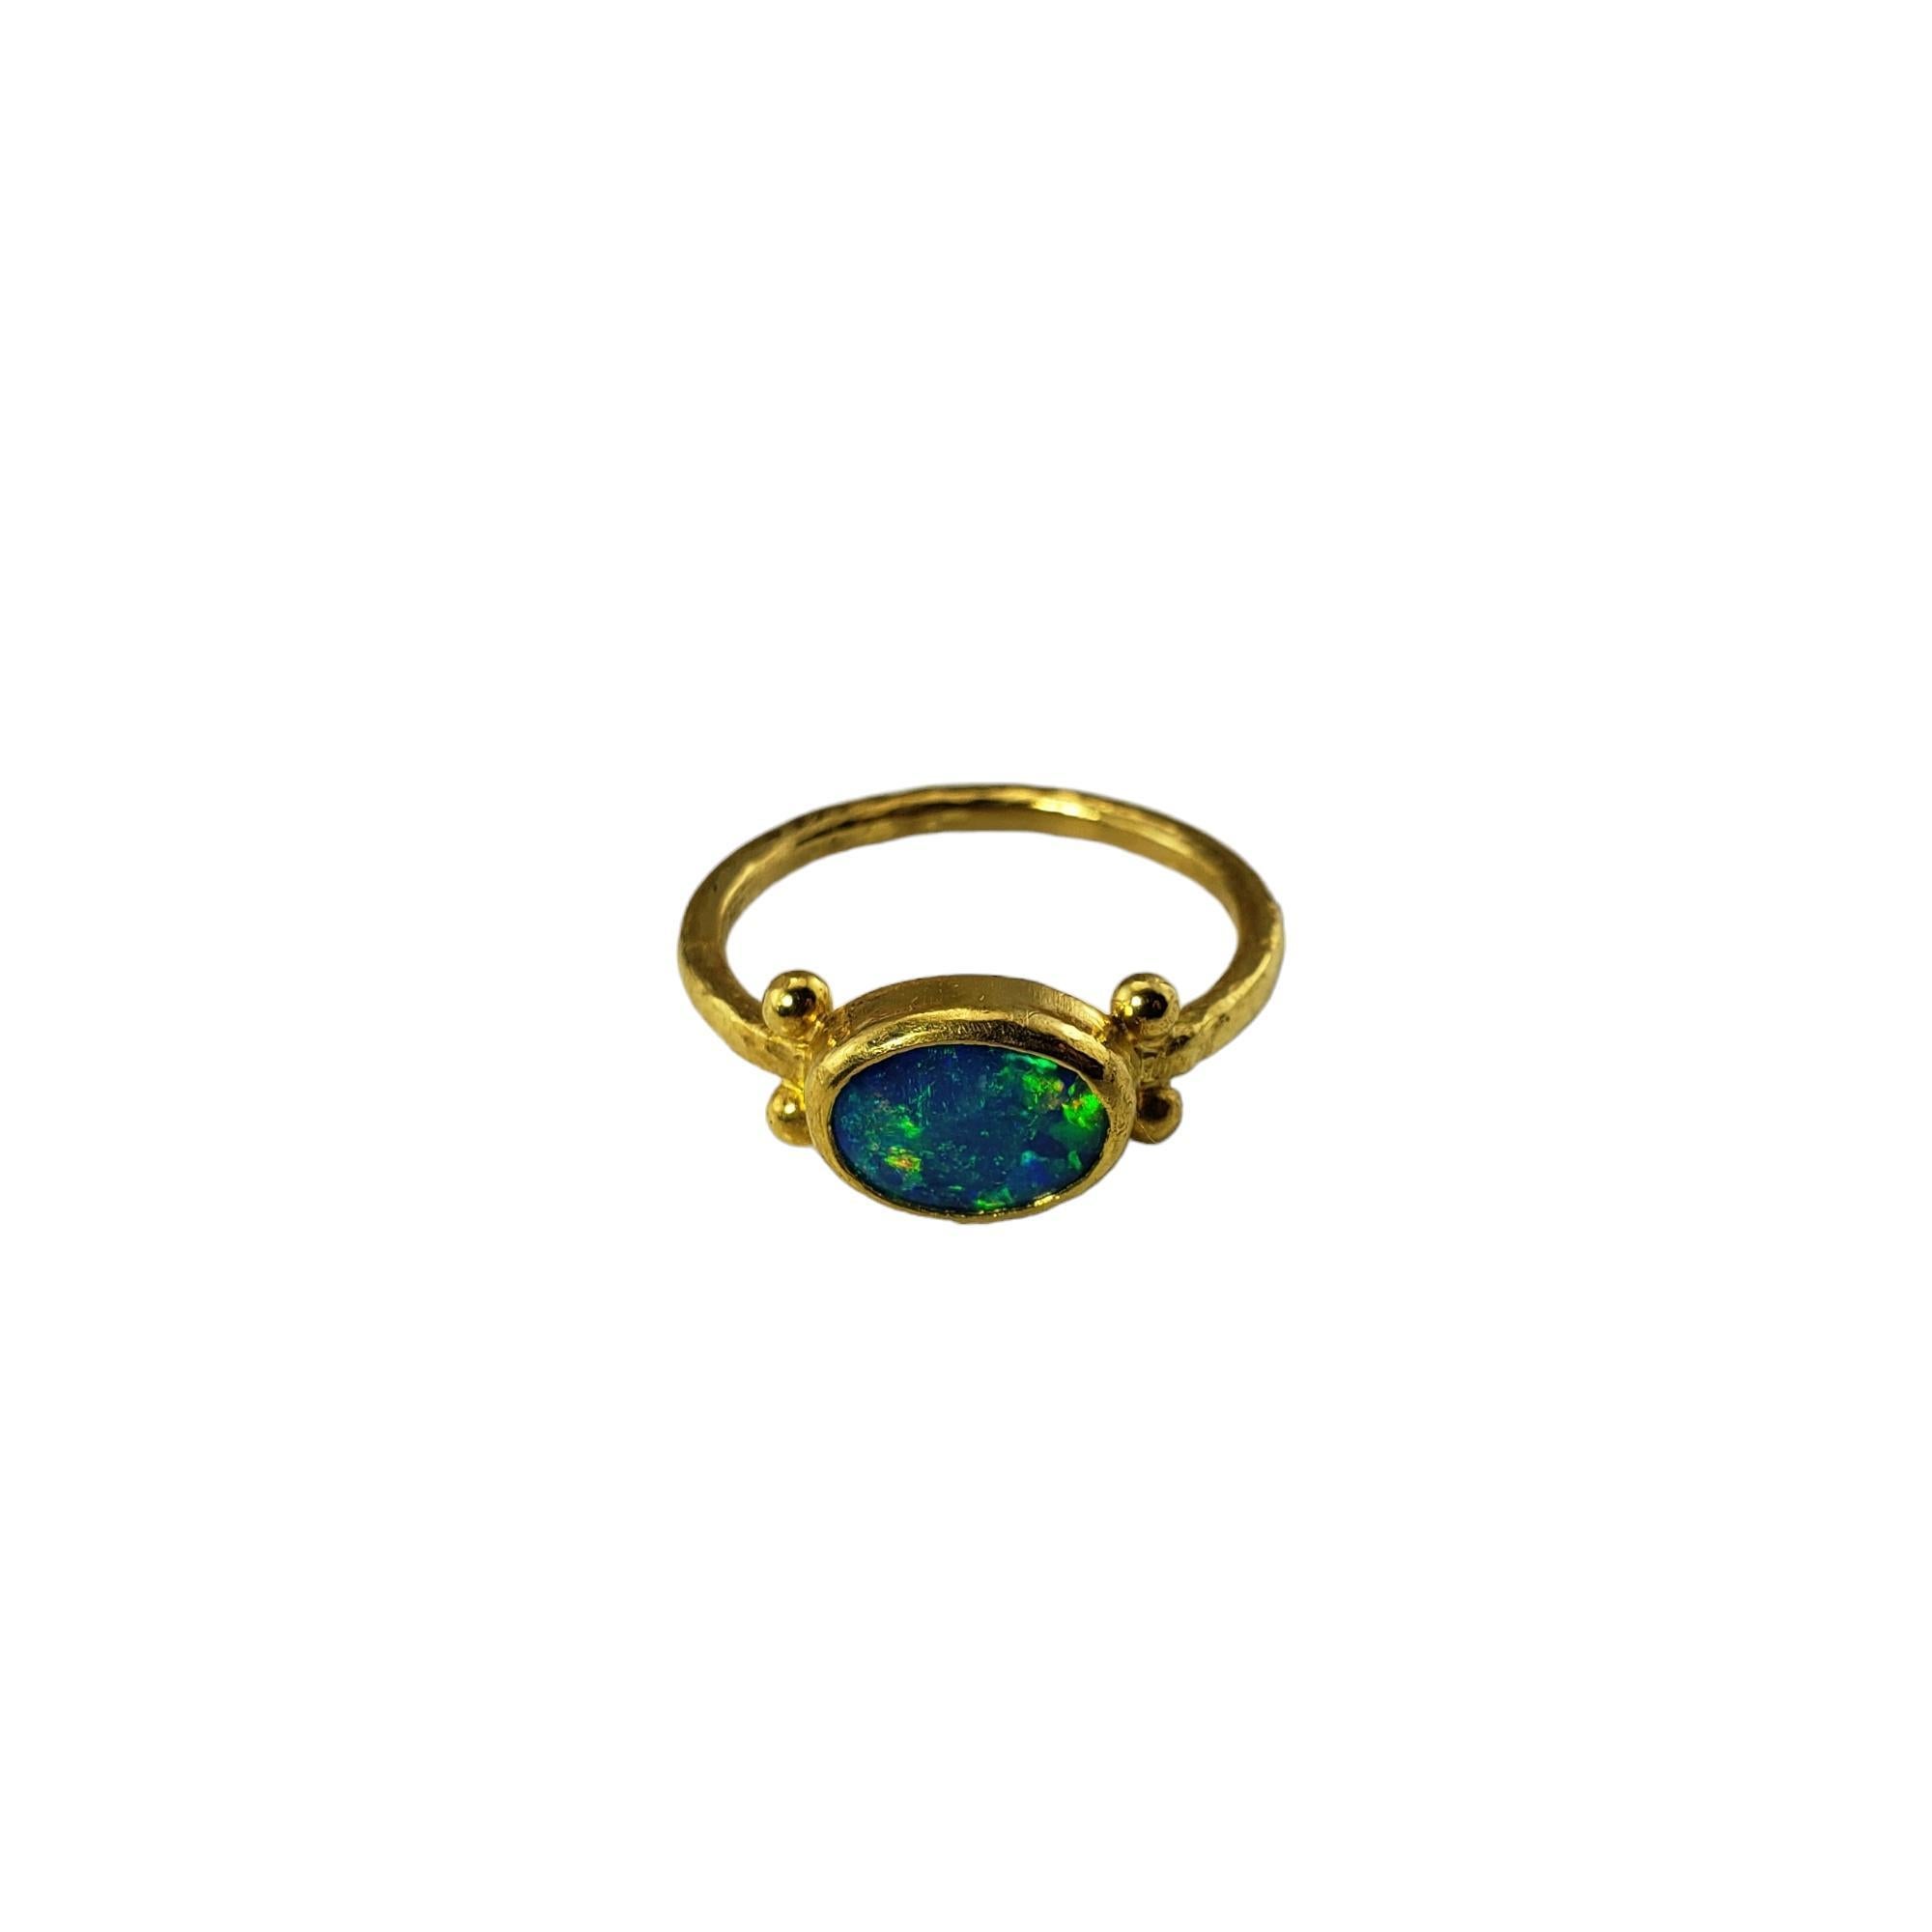 24 Karat Yellow Gold Black Opal Ring Size 7 JAGi Certified-

This elegant ring features one oval black opal (8.4 mm x 6.3 mm) set in beautifully detailed 24K yellow gold.  Width:  8 mm.
Shank: 2 mm.

Opal weight: .99 ct.

Ring Size: 7

Stamped: KID